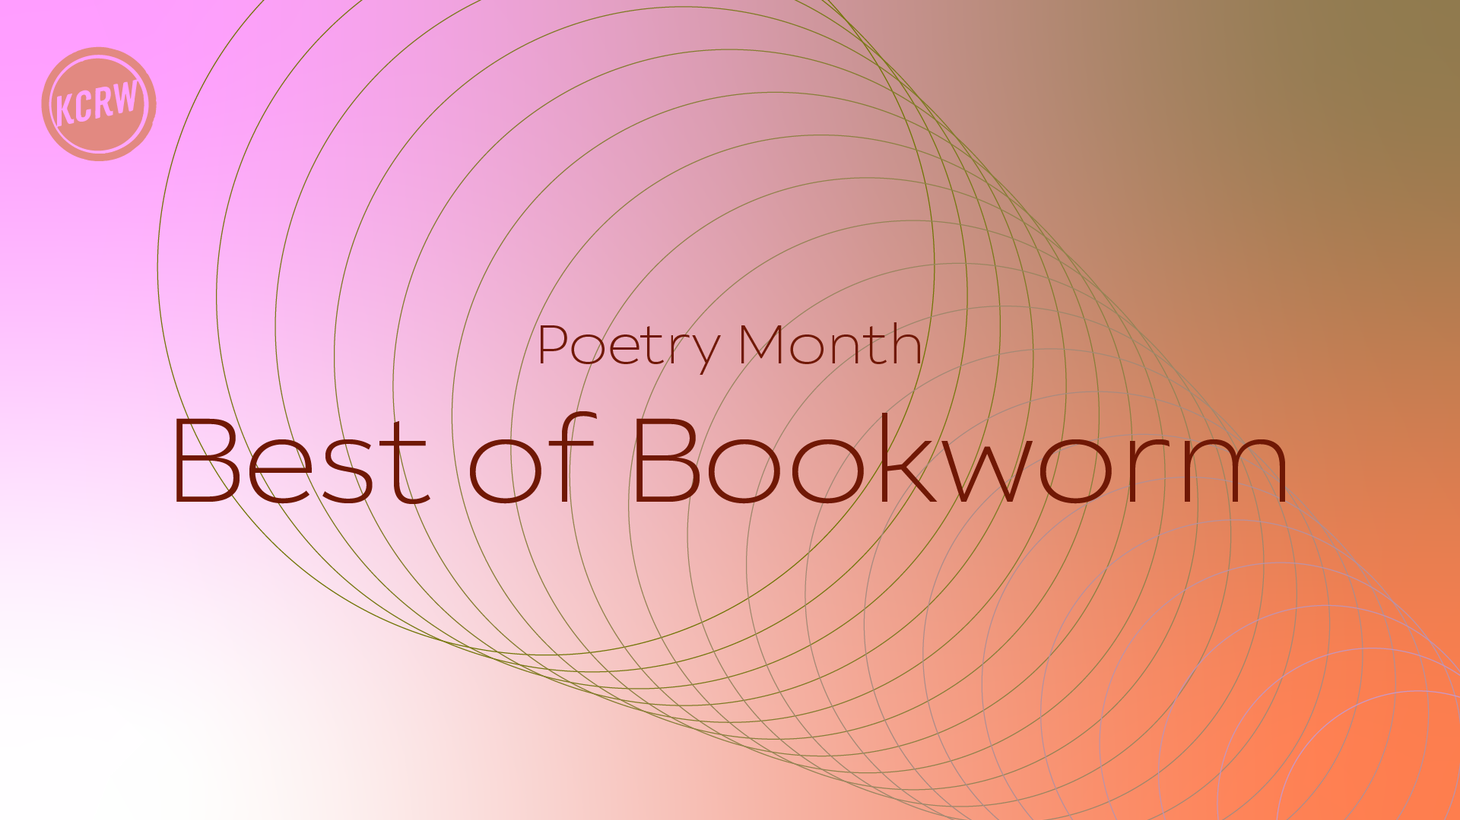 Celebrate National Poetry Month with Bookworm’s favorite poets and collections.